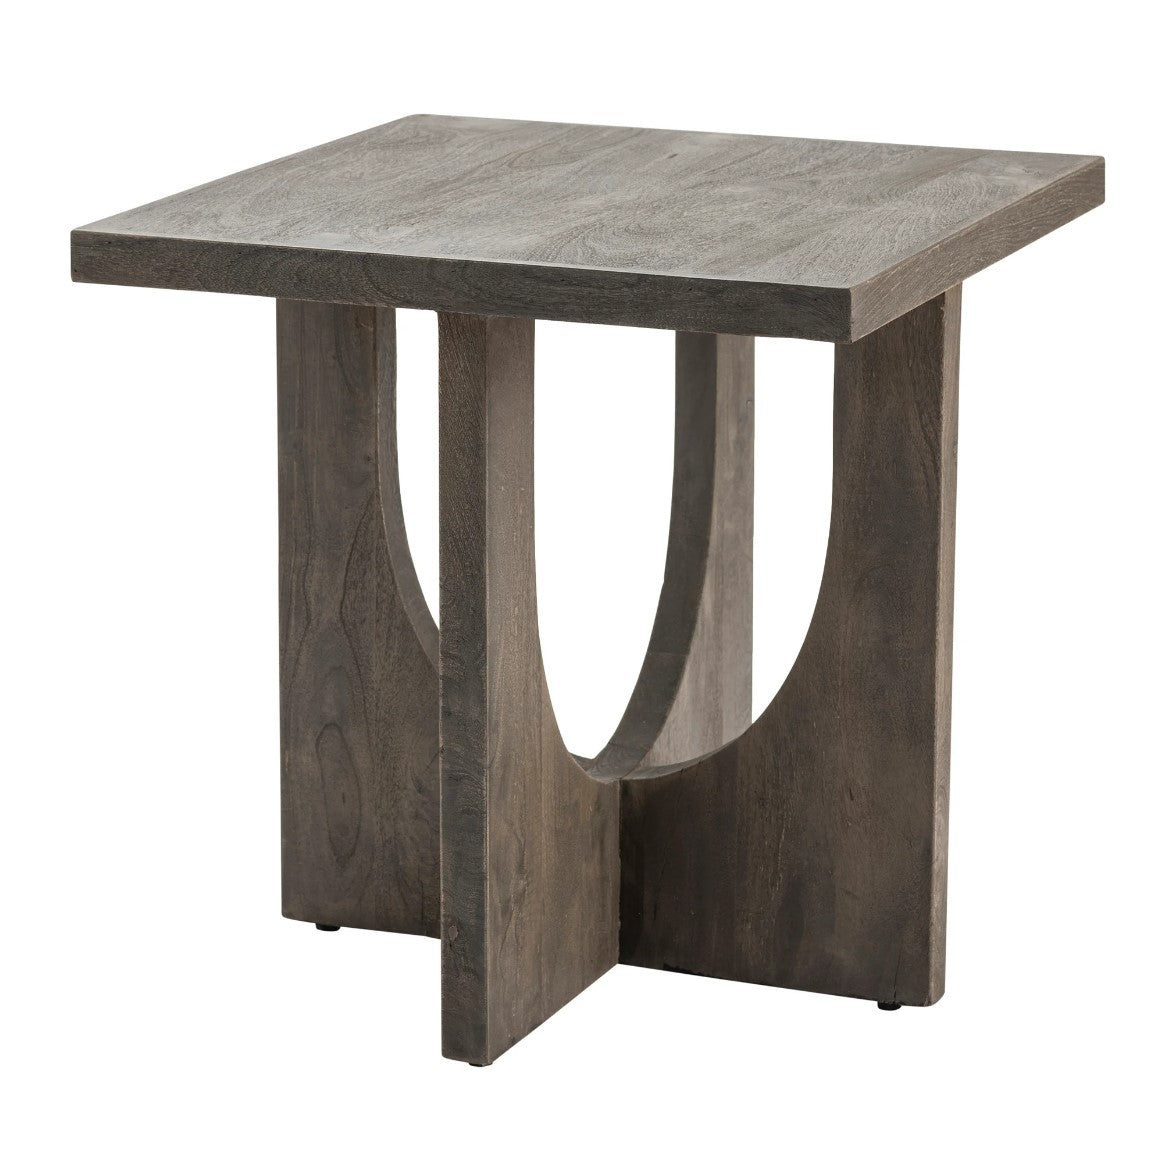 Crestview Collection Glenridge 24" x 24" x 25" Occasional Wood End Table In Natural Wood Finish